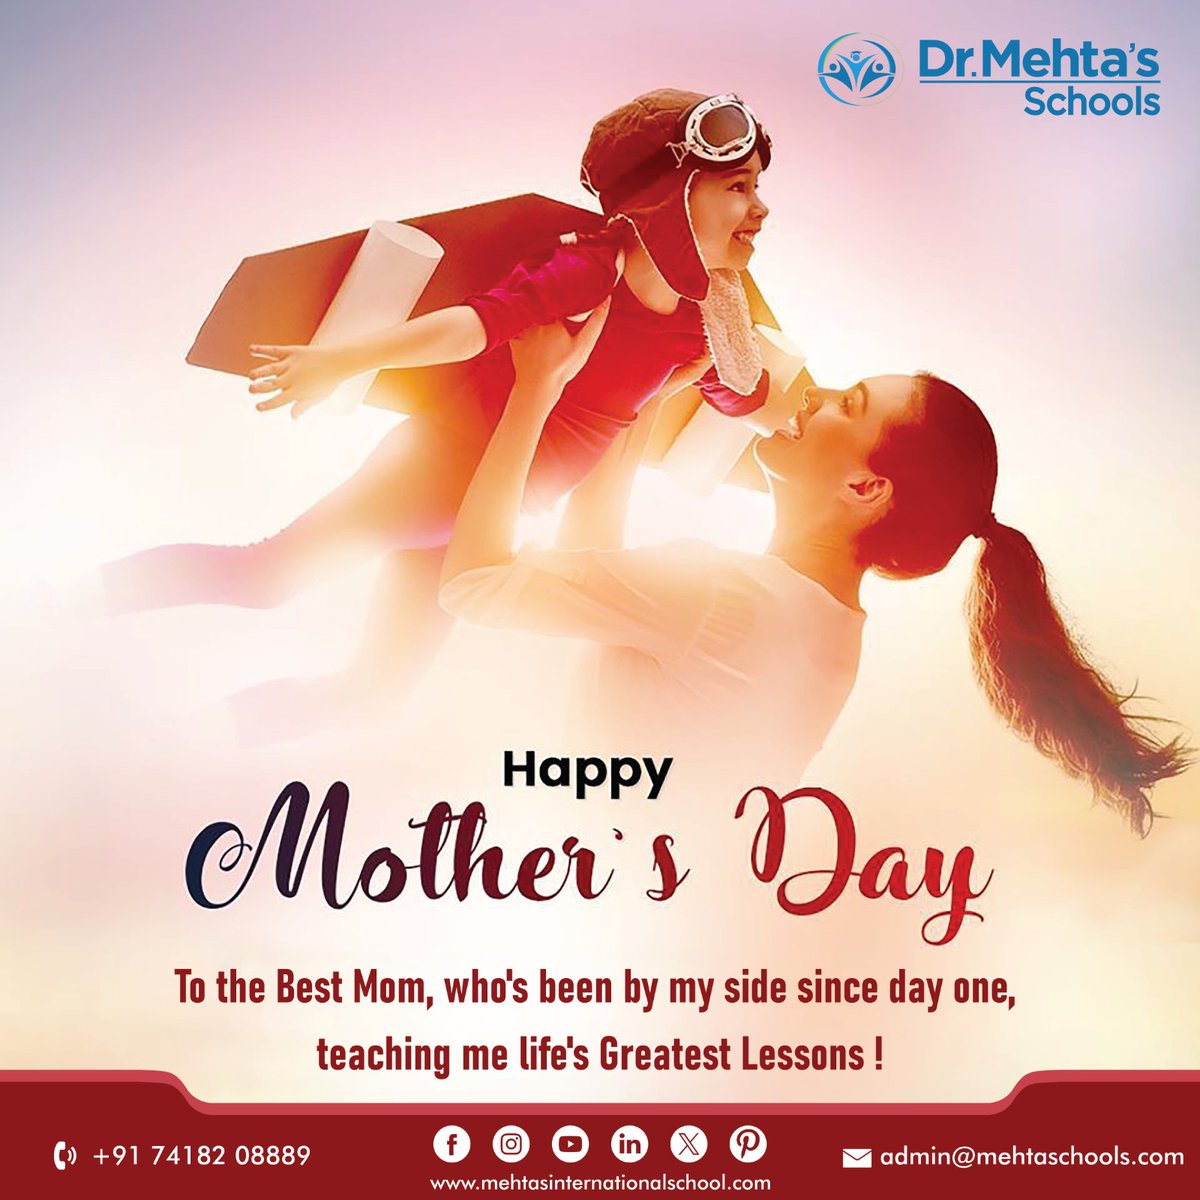 Not just on Mother's Day, let's honor and appreciate her every day for her guidance, love, and patience in leading us on the right path.
.
.
.
#mothersday #mother #mom #womenempowerment #womenempoweringwomen #womensupportingwomen #women #selfhealing #selfhelp #personalgrowth